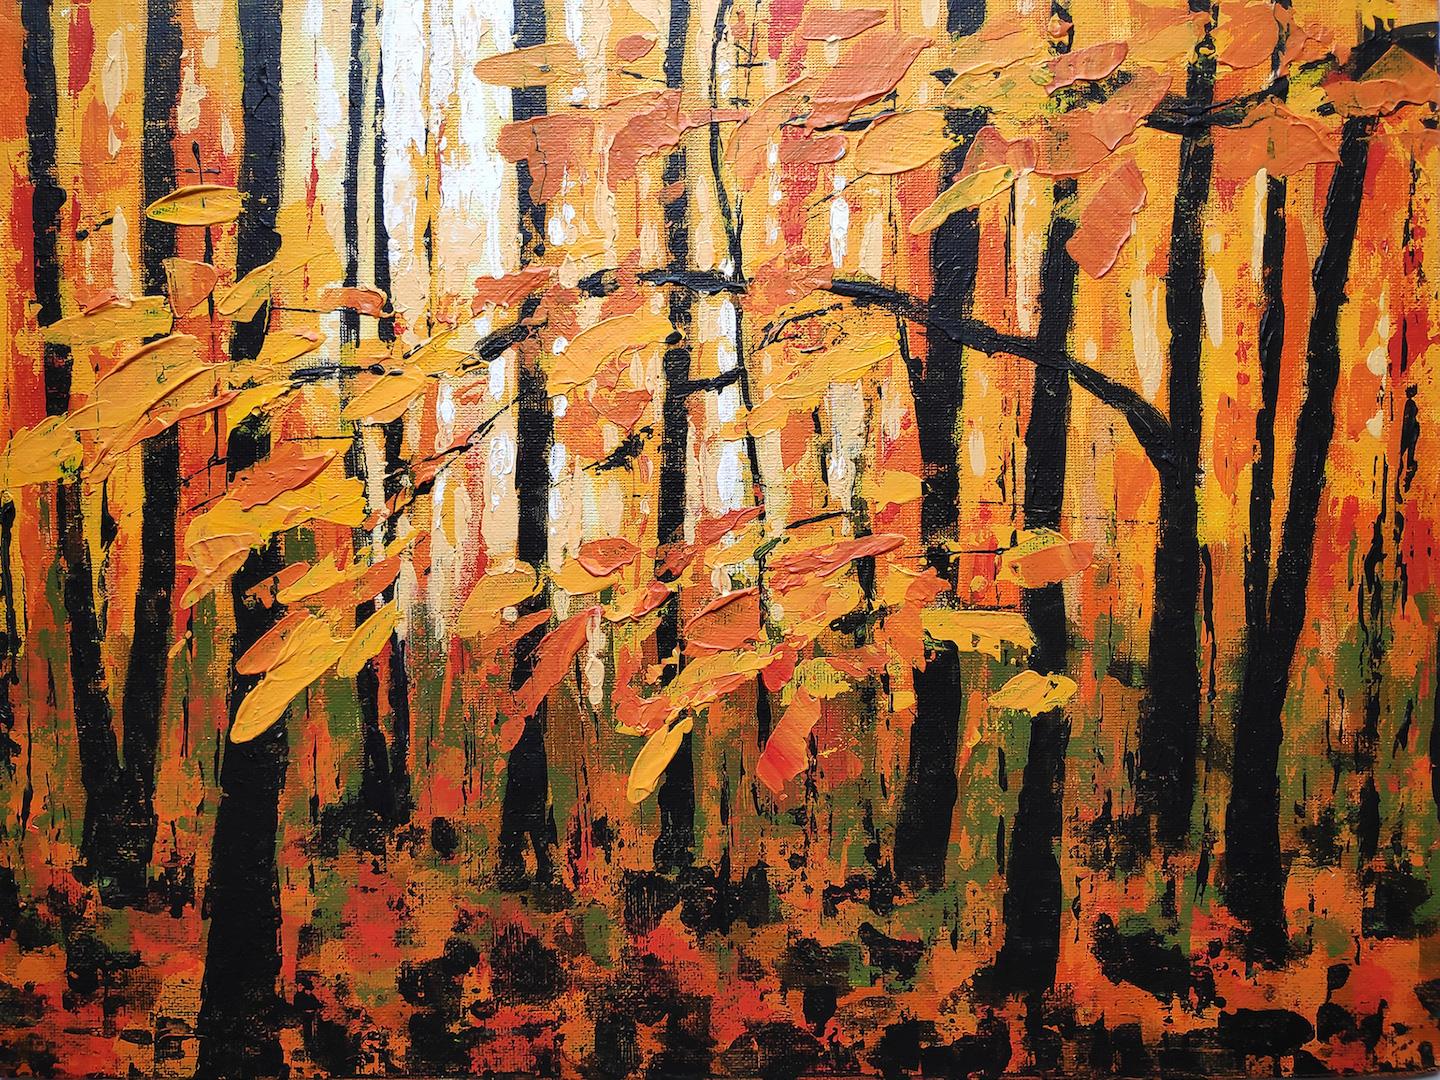 Alexandra Buckle
Autumn Woodland Sight
Acrylic painting on canvas board
Sold unframed
Painting size: 30 cm x 40 cm x 0.5 cm

Autumn Woodland Sight is an acrylic landscape painting by Alexandra Buckle, inspired by an imaginary woodland scene of light